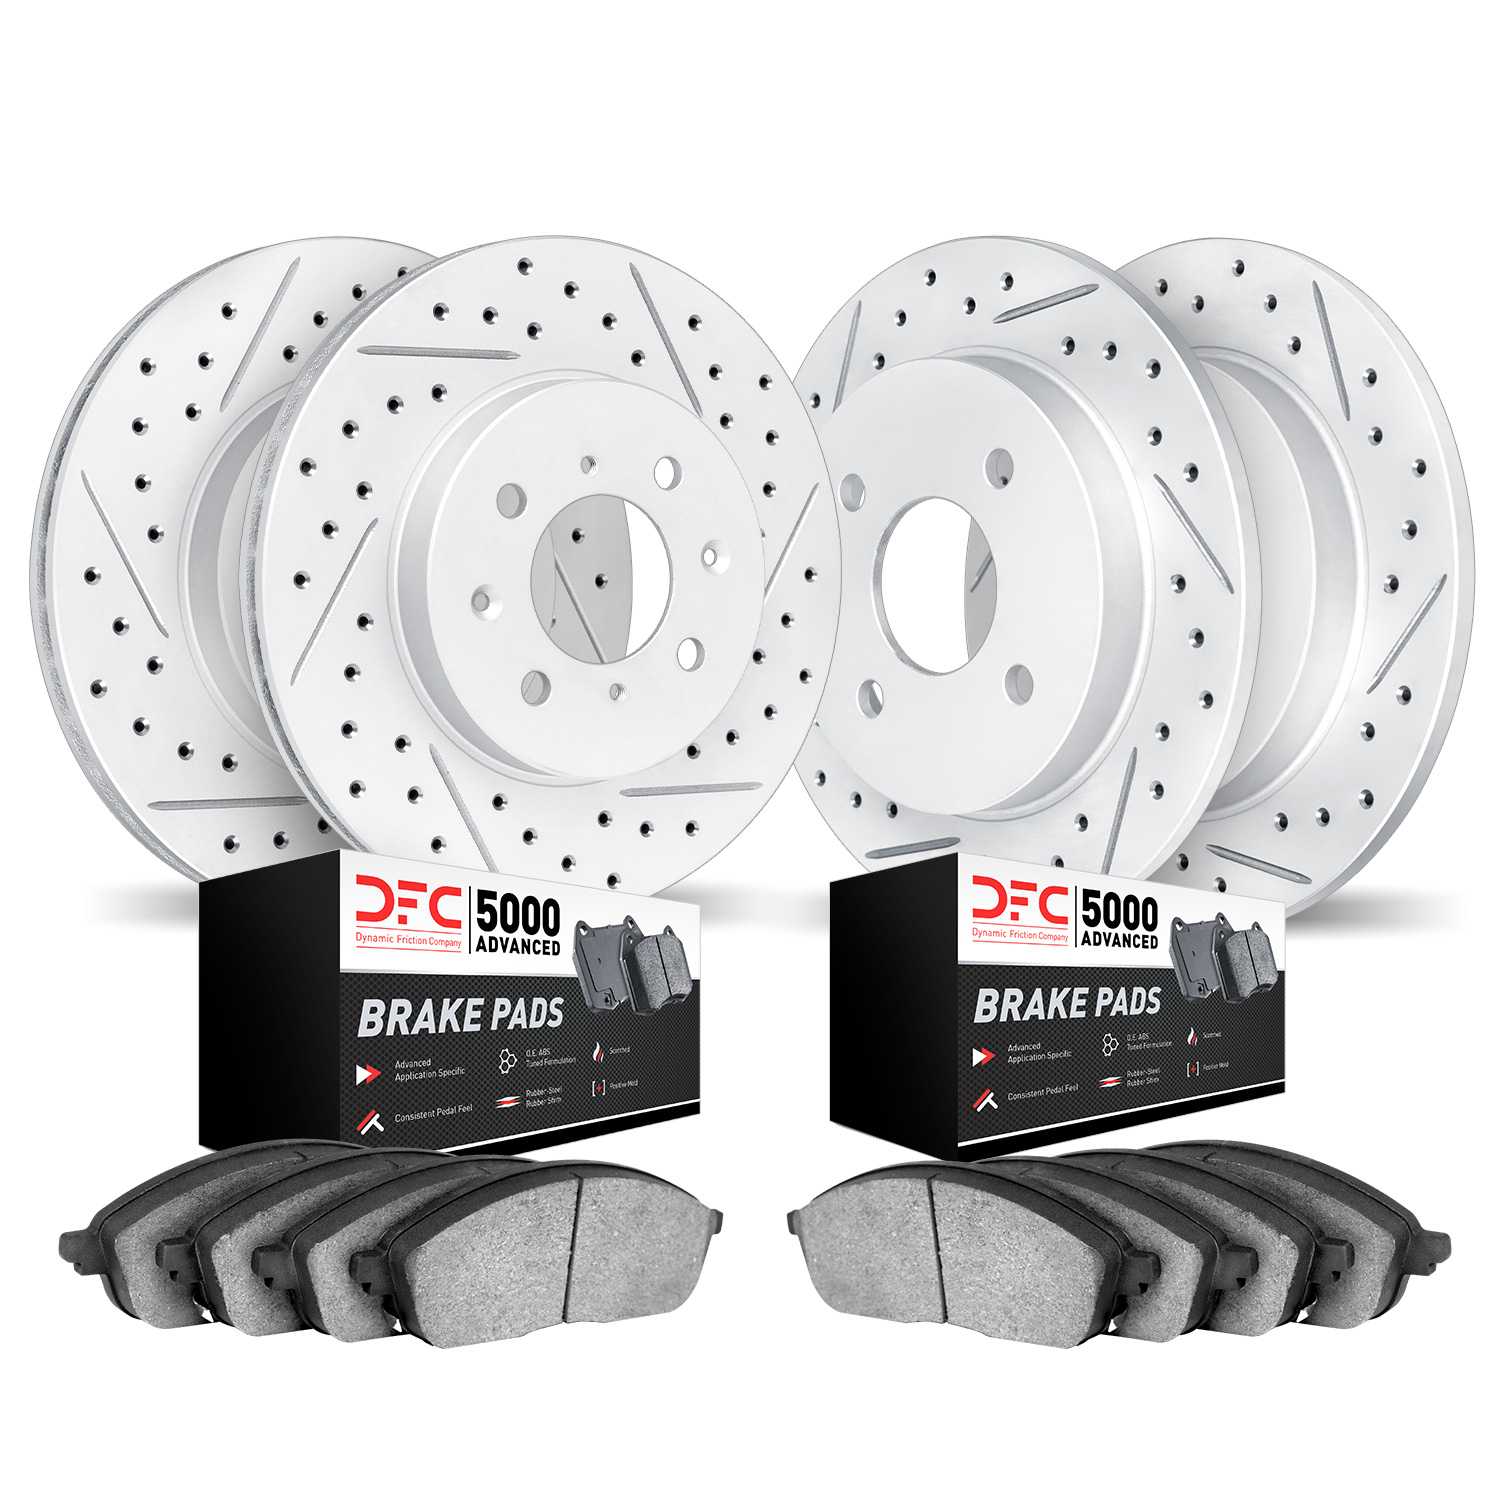 2504-07000 Geoperformance Drilled/Slotted Rotors w/5000 Advanced Brake Pads Kit, 2012-2019 Mopar, Position: Front and Rear